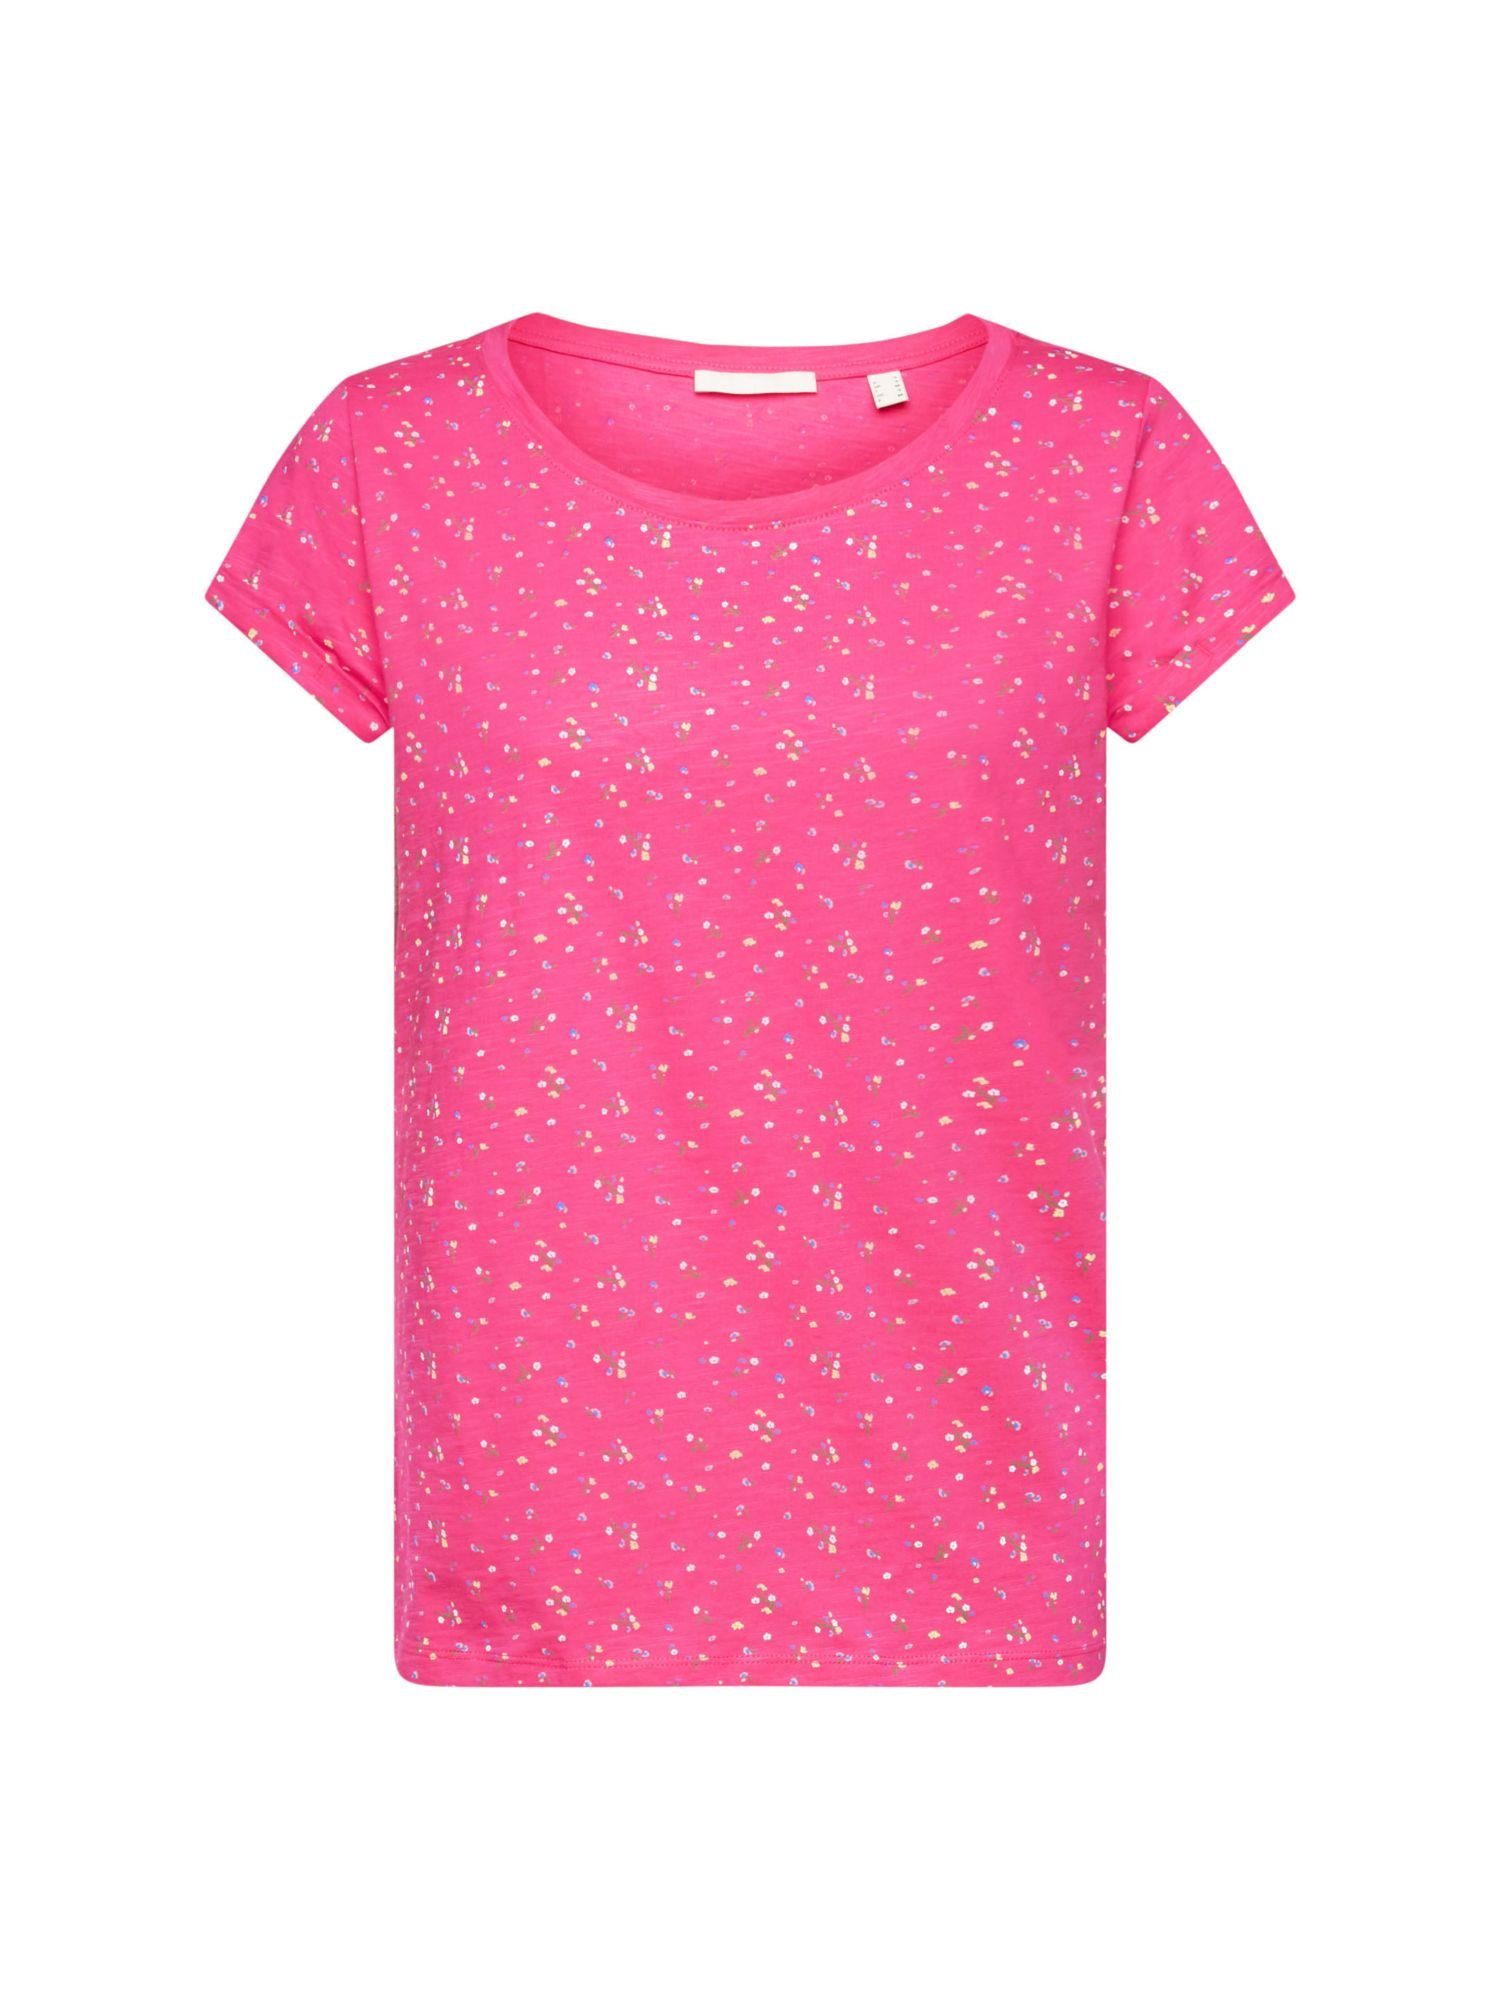 Esprit edc T-Shirt Allover-Muster T-Shirt (1-tlg) FUCHSIA PINK mit by